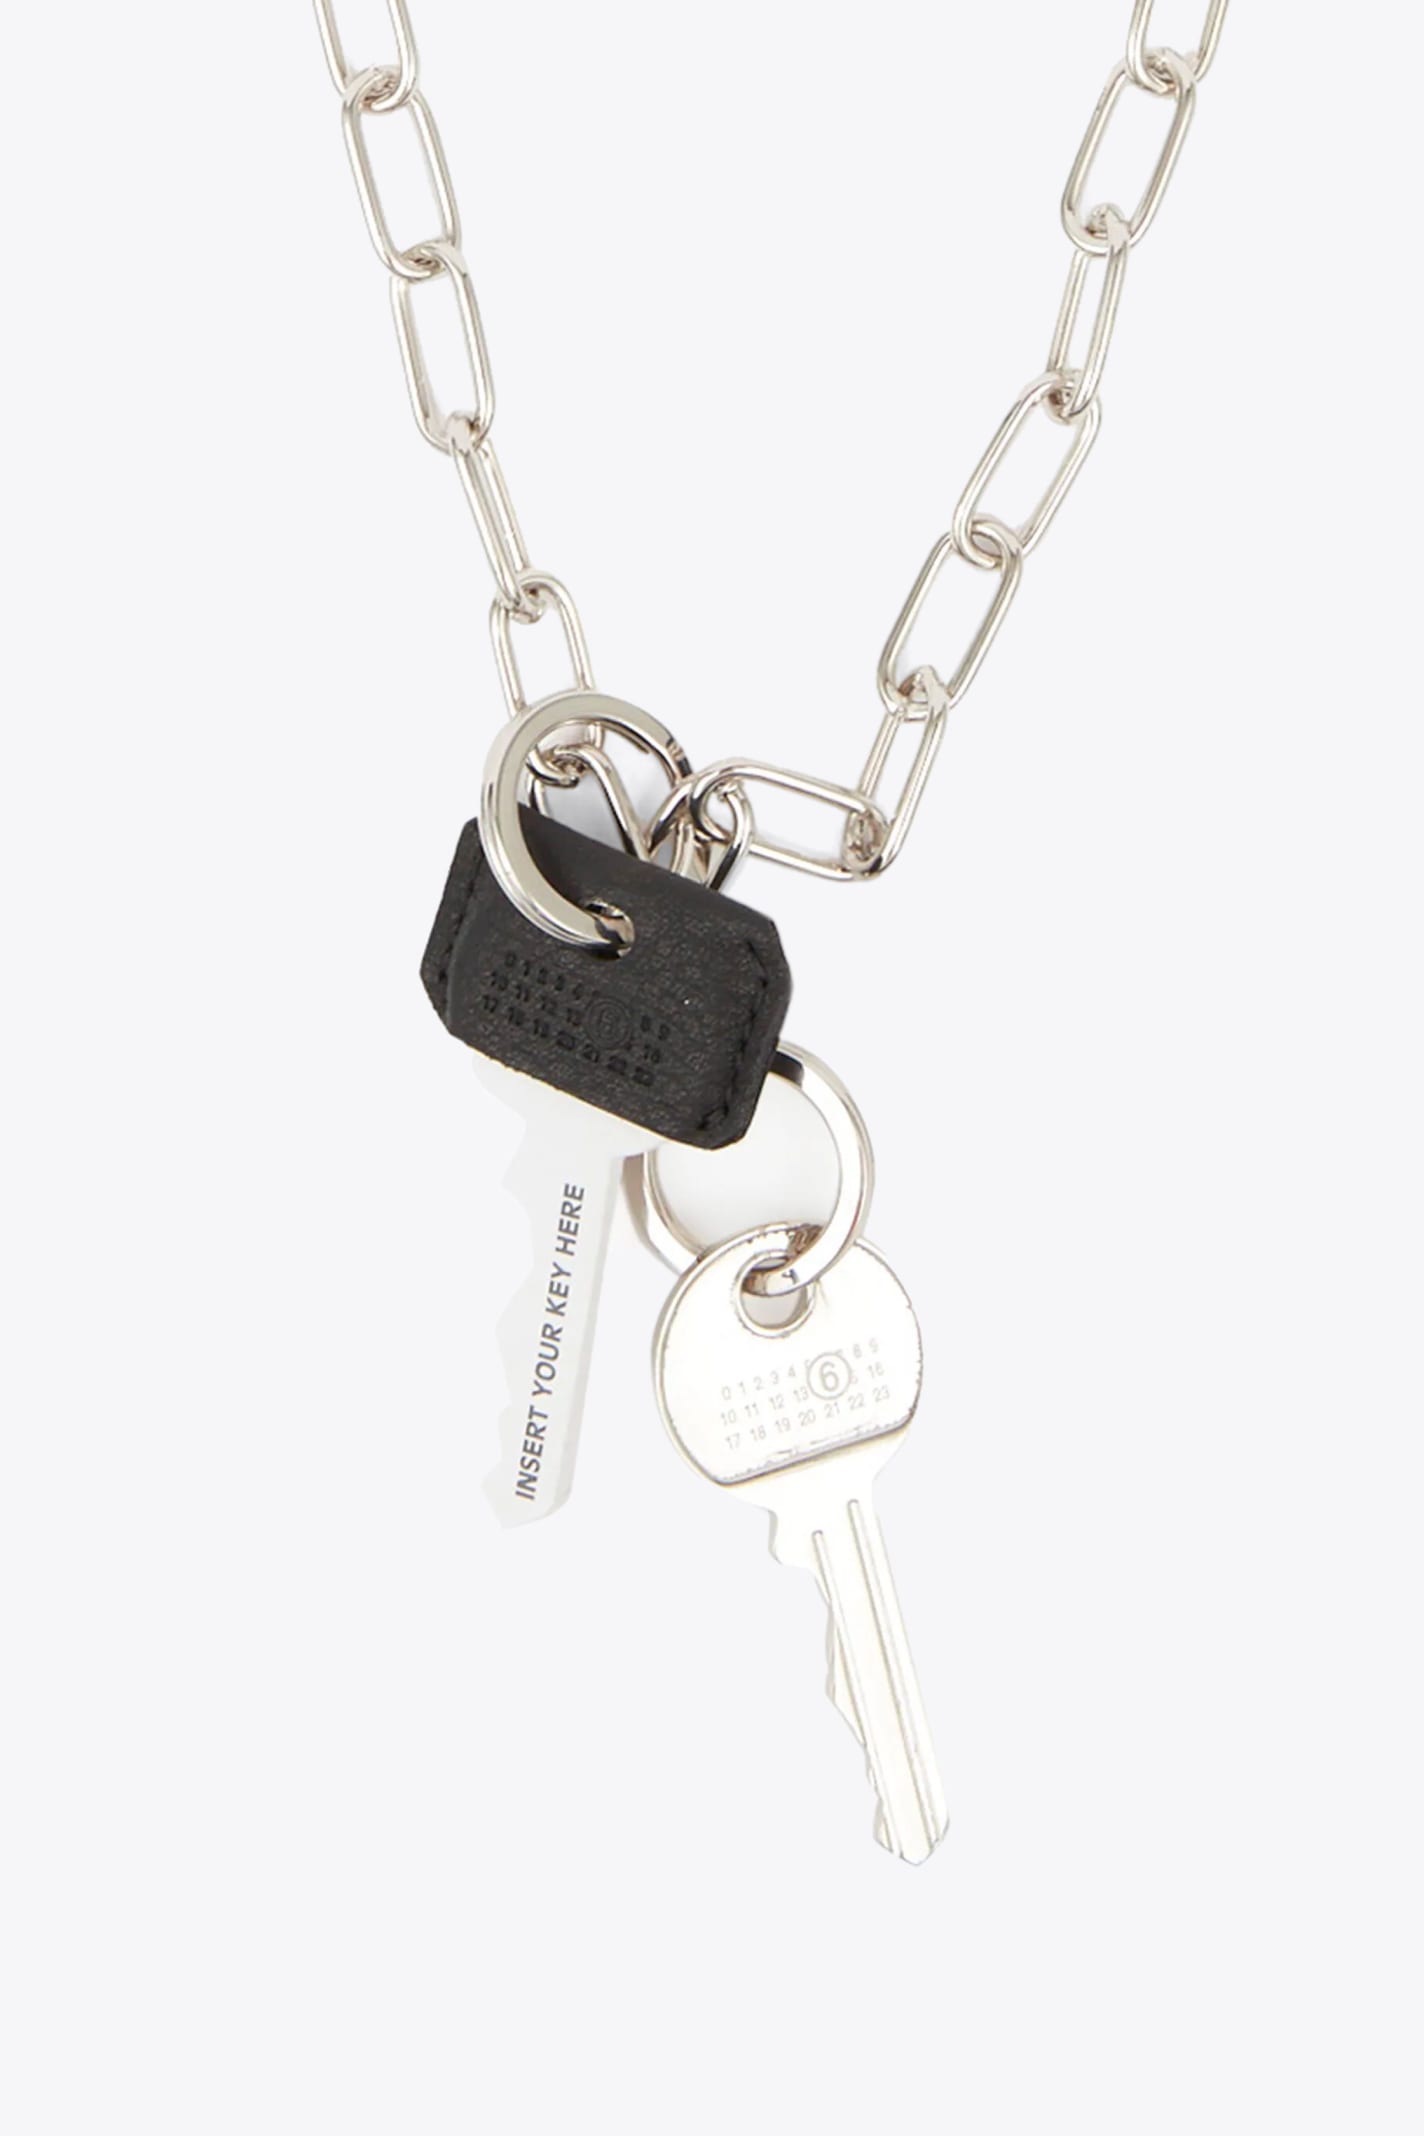 Shop Mm6 Maison Margiela Collana Silver Metal Chain Necklace With Keys In Argento